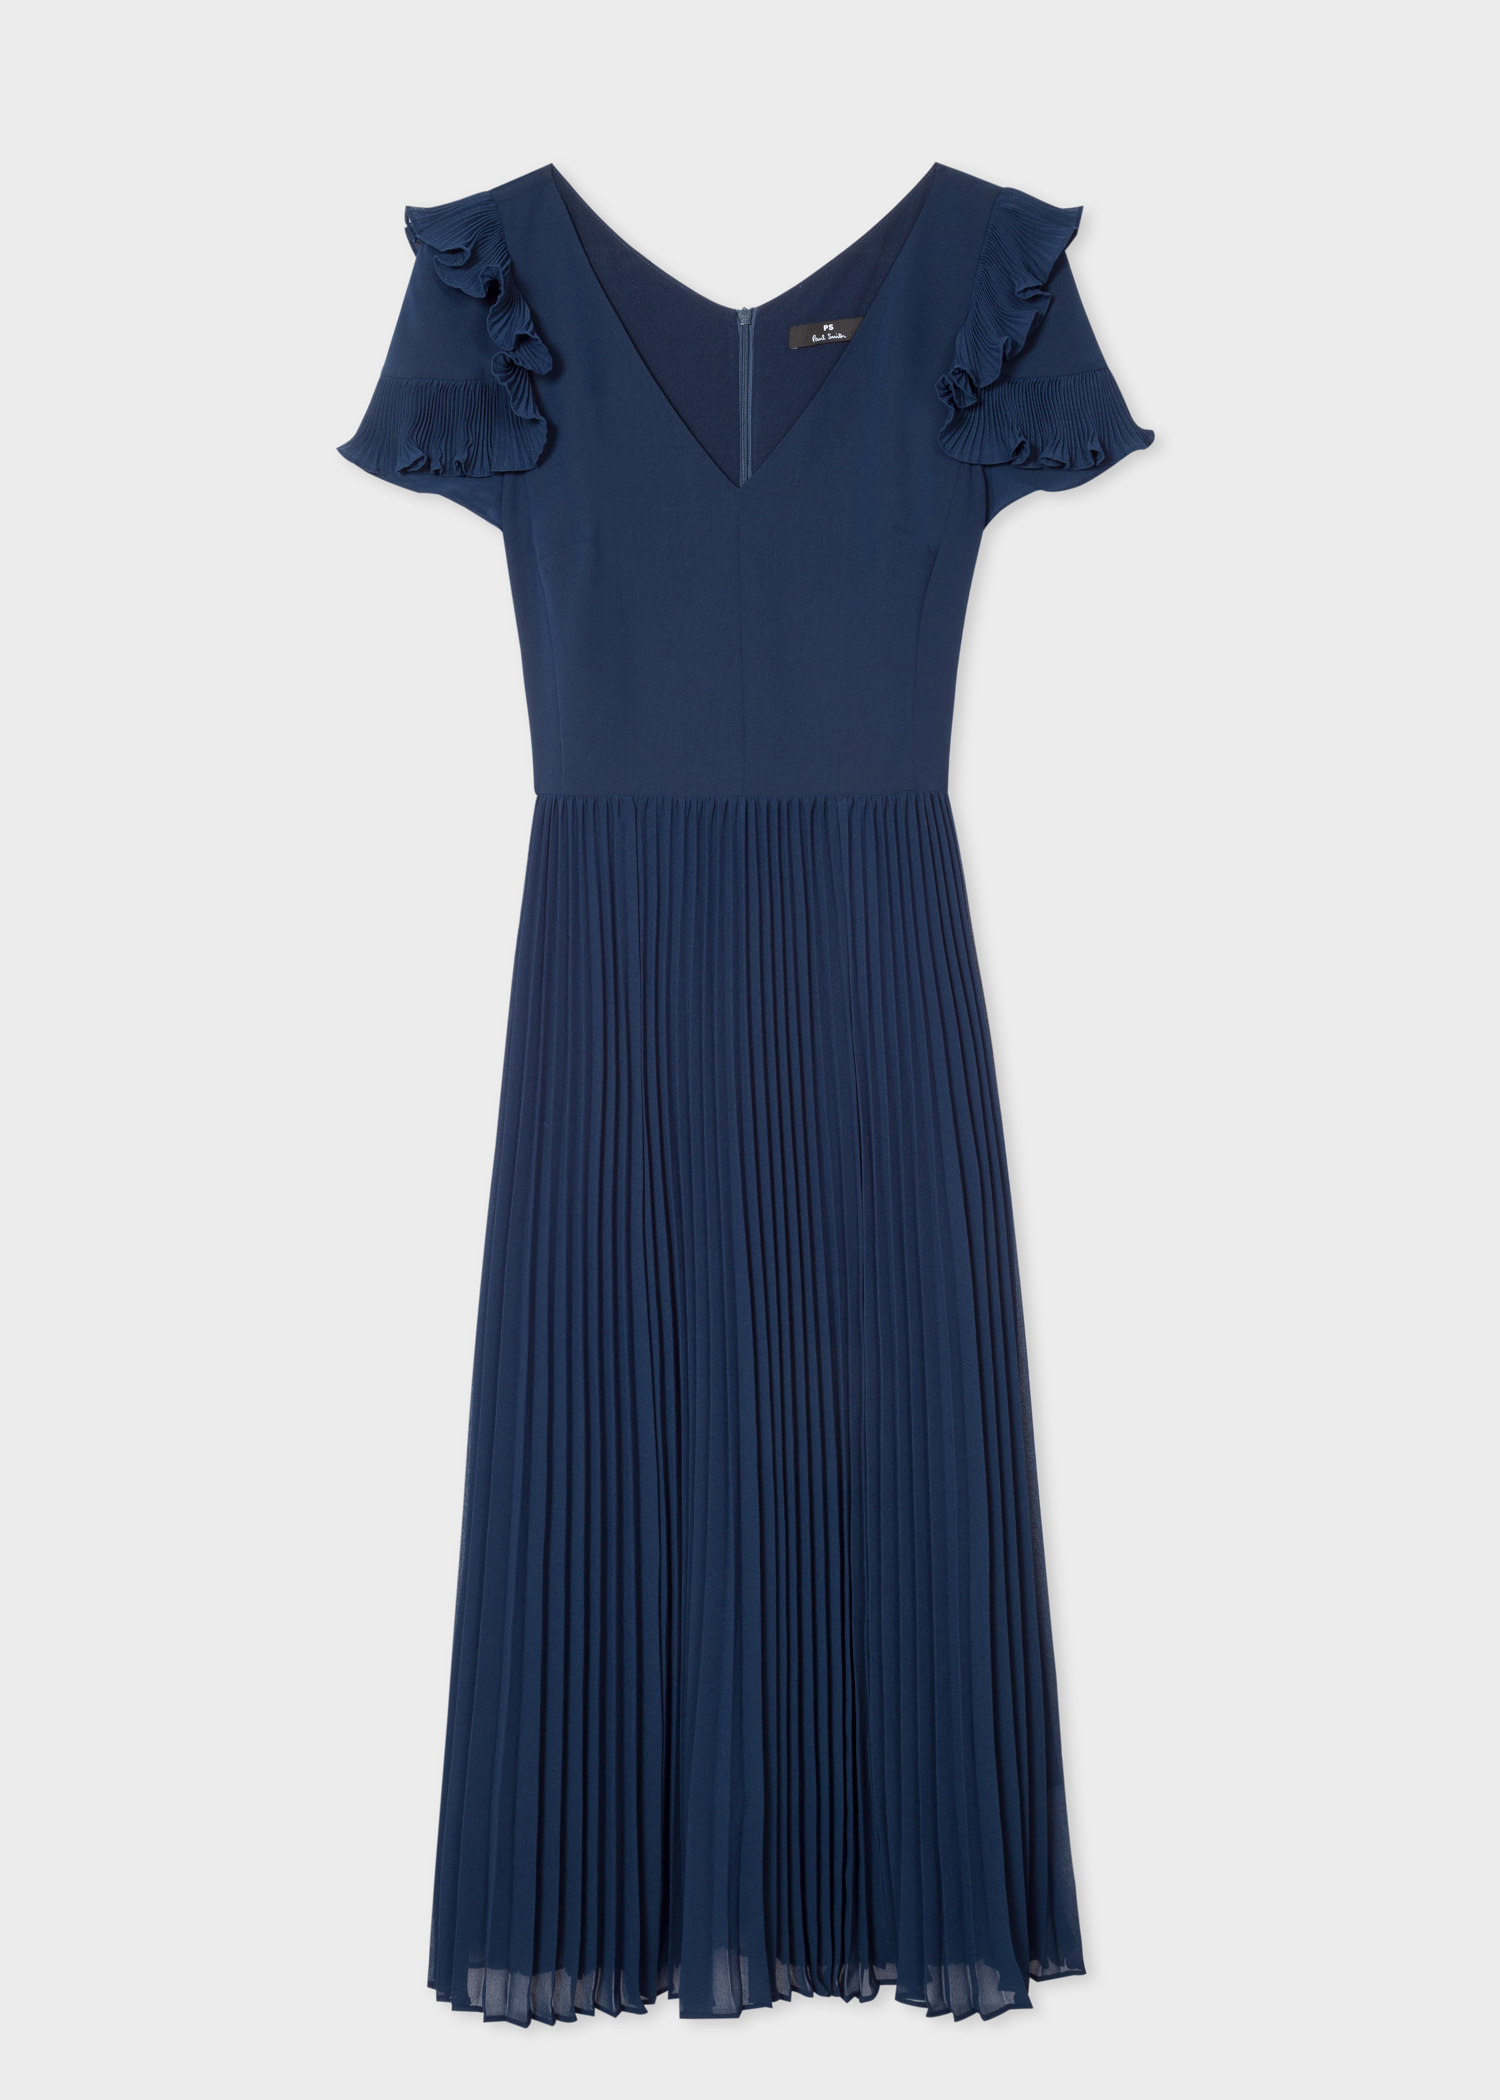 Front view - Women's Navy Pleated Short Sleeve Midi Dress With Ruffle Details Paul Smith